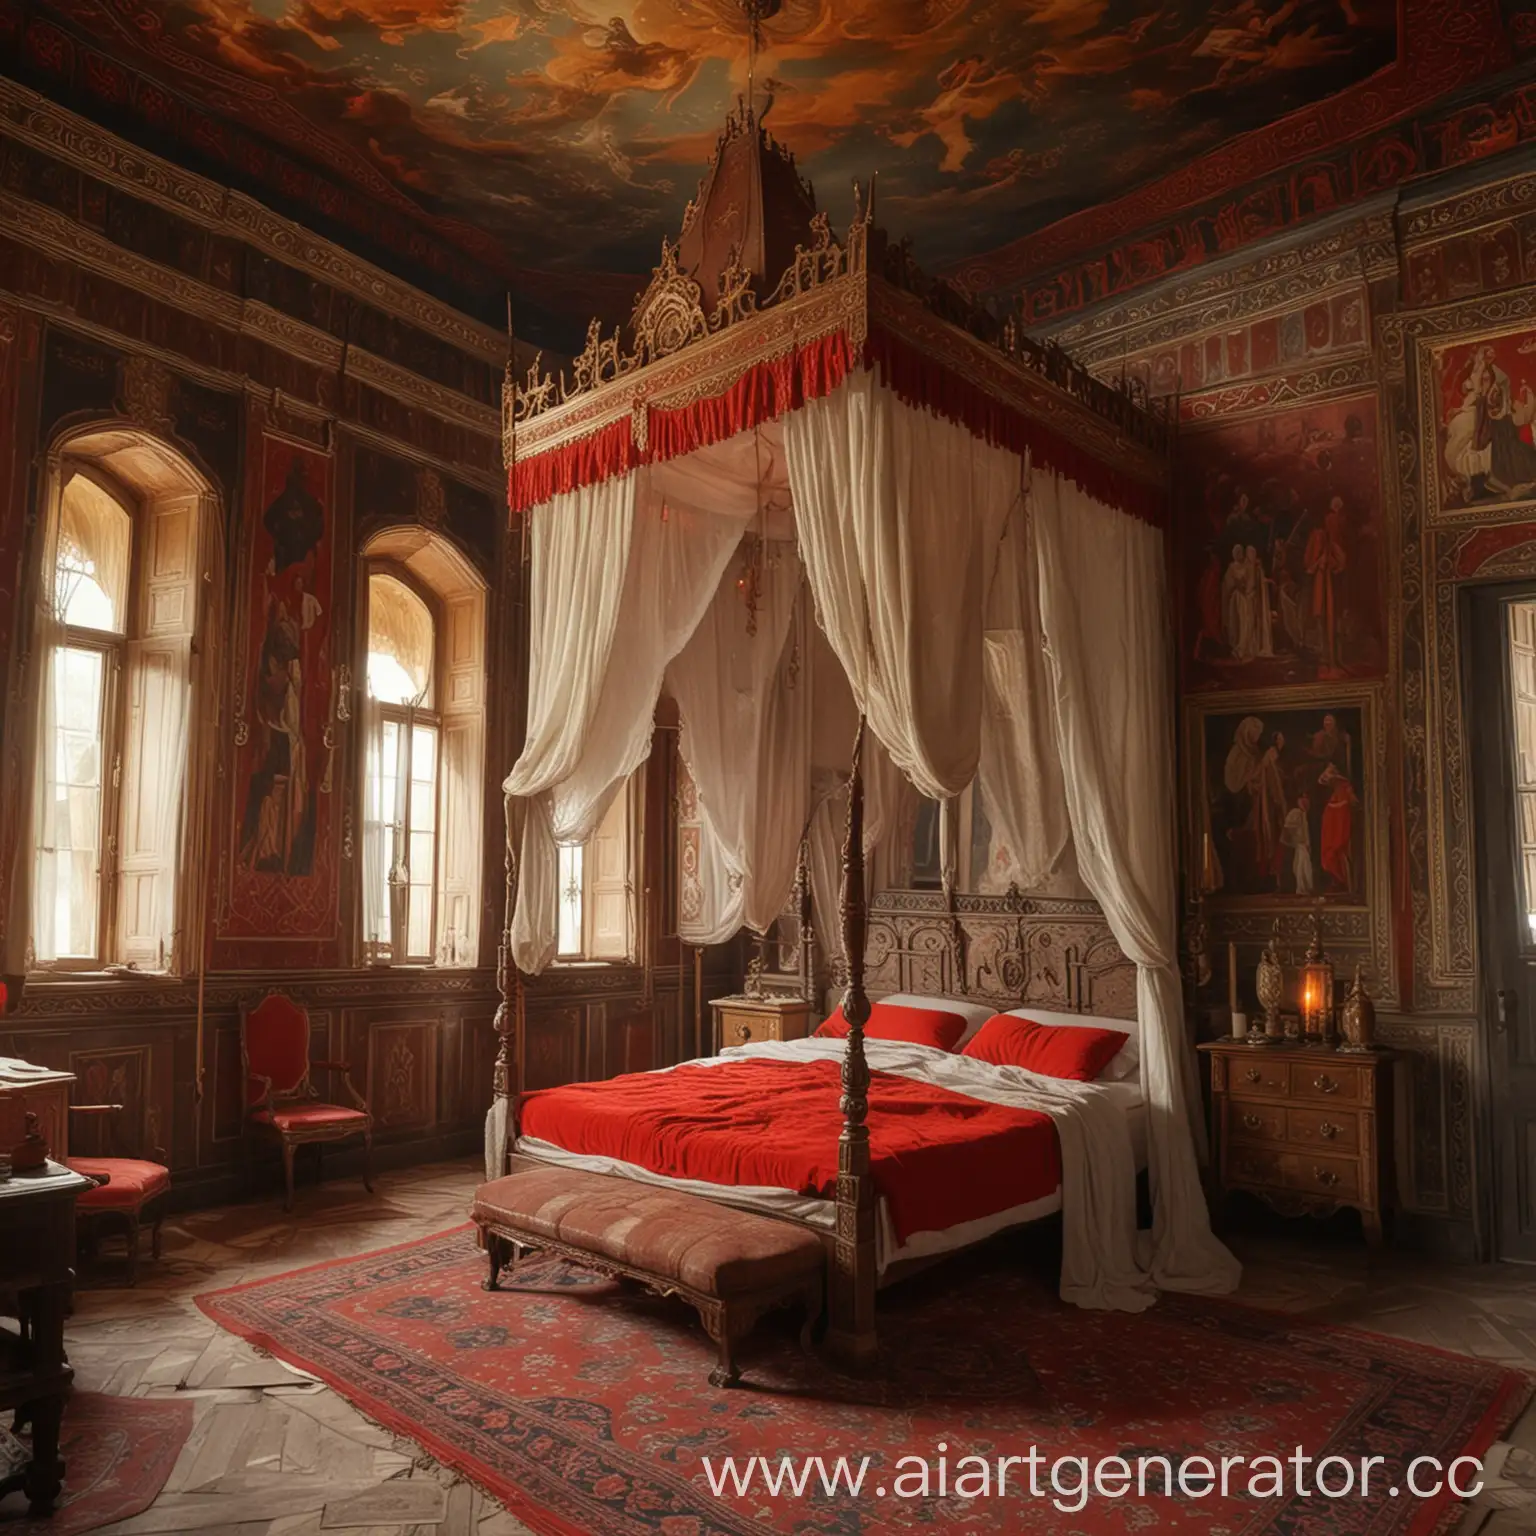 Ancient-Rus-Princes-Chambers-Fairytale-Palace-Bedroom-with-Paintings-and-Candlelight